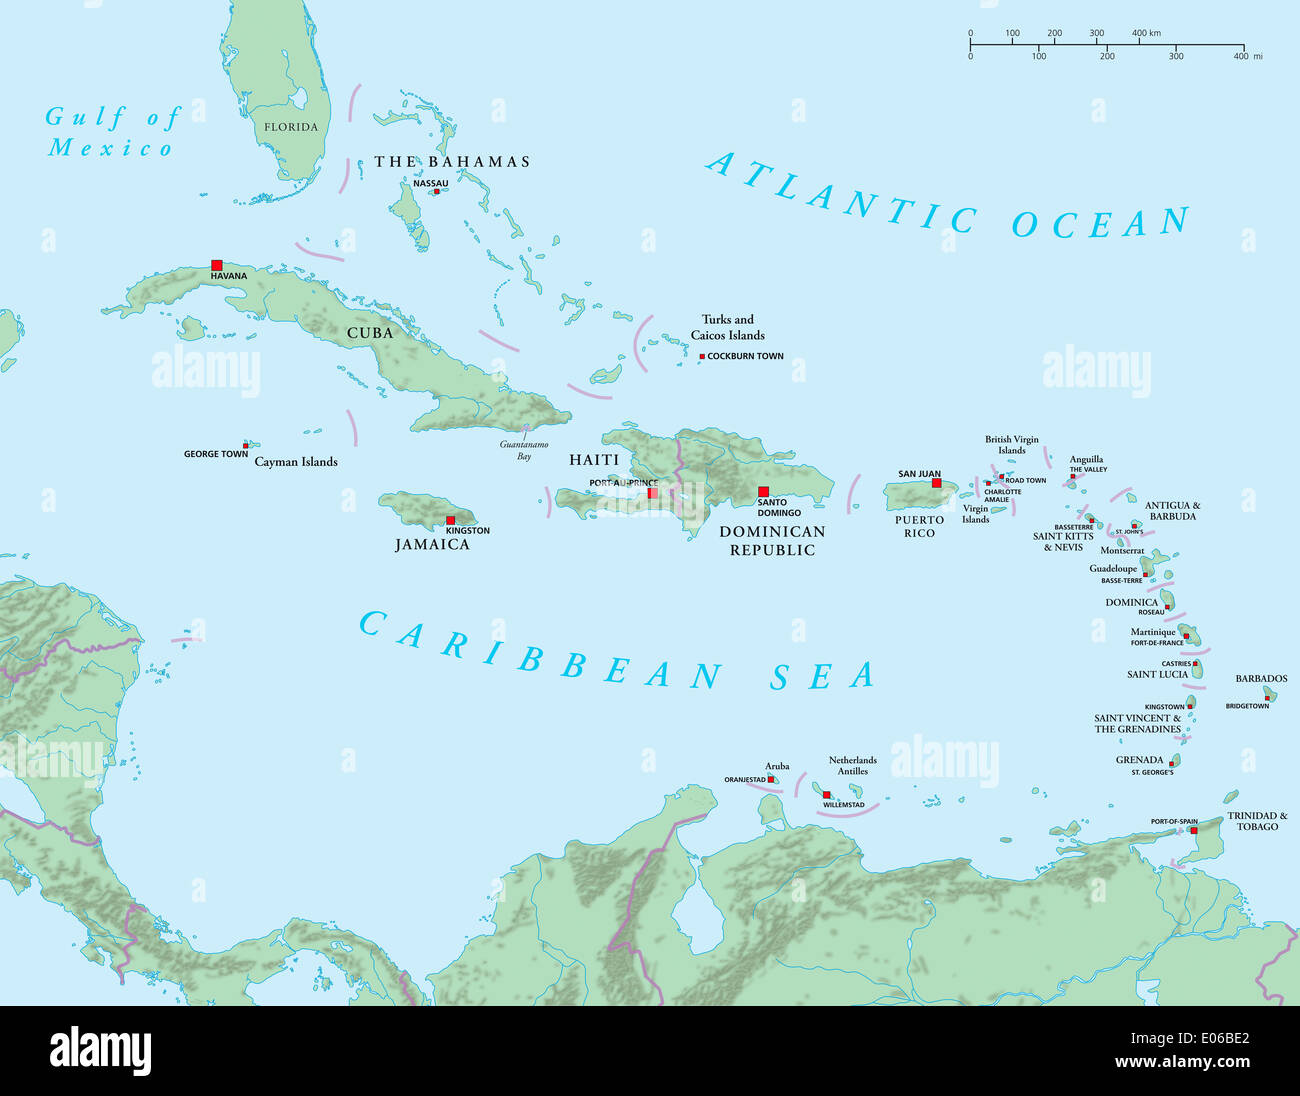 Caribbean - Large And Lesser Antilles - Political Map Stock Photo